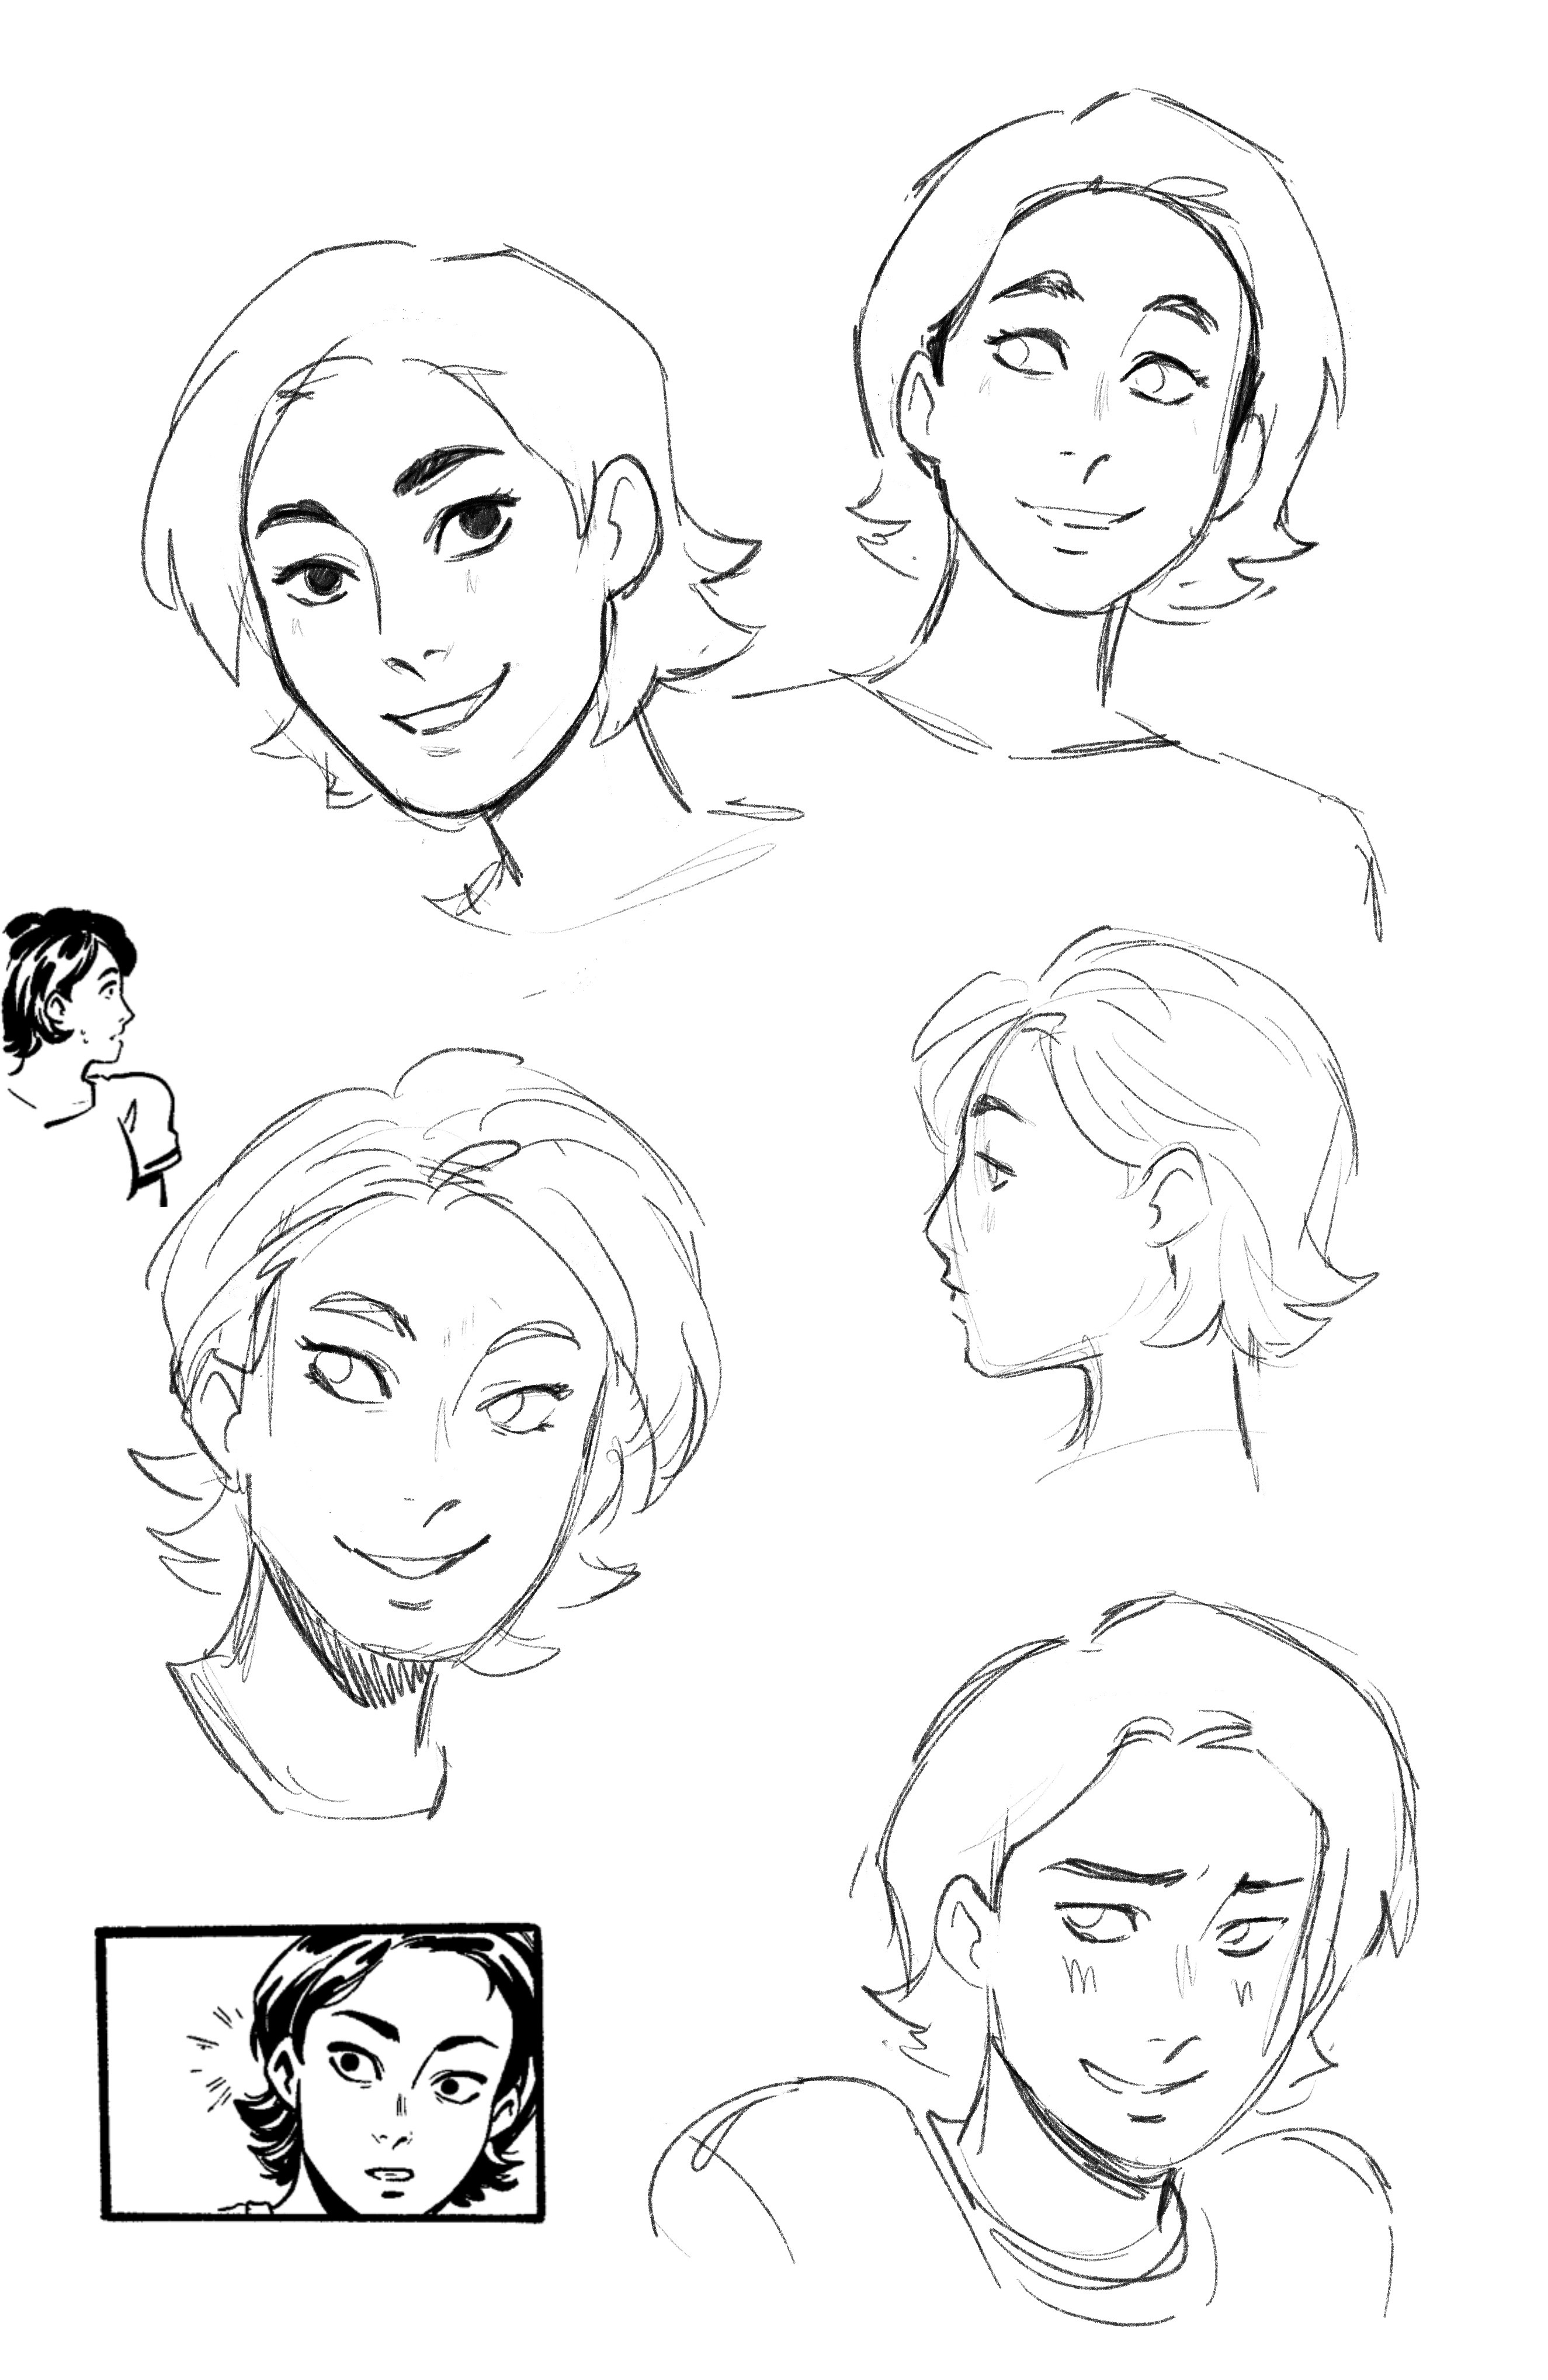 Lainie sketches to find my own way to draw her (and specifically her hair)